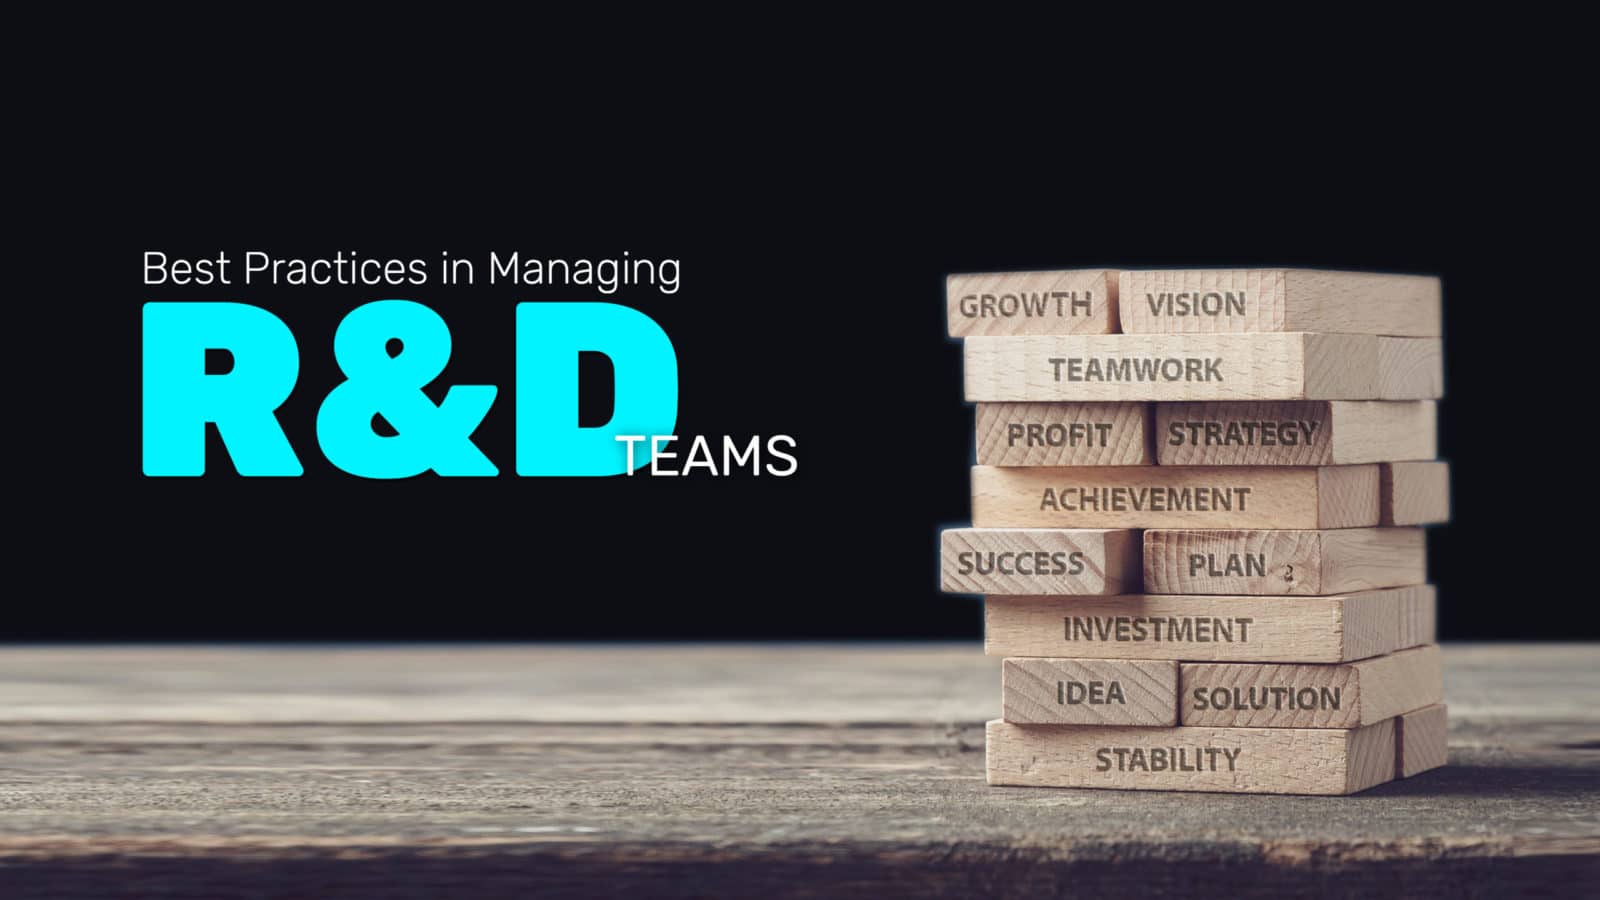 Best practices in managing mid-size R&D teams